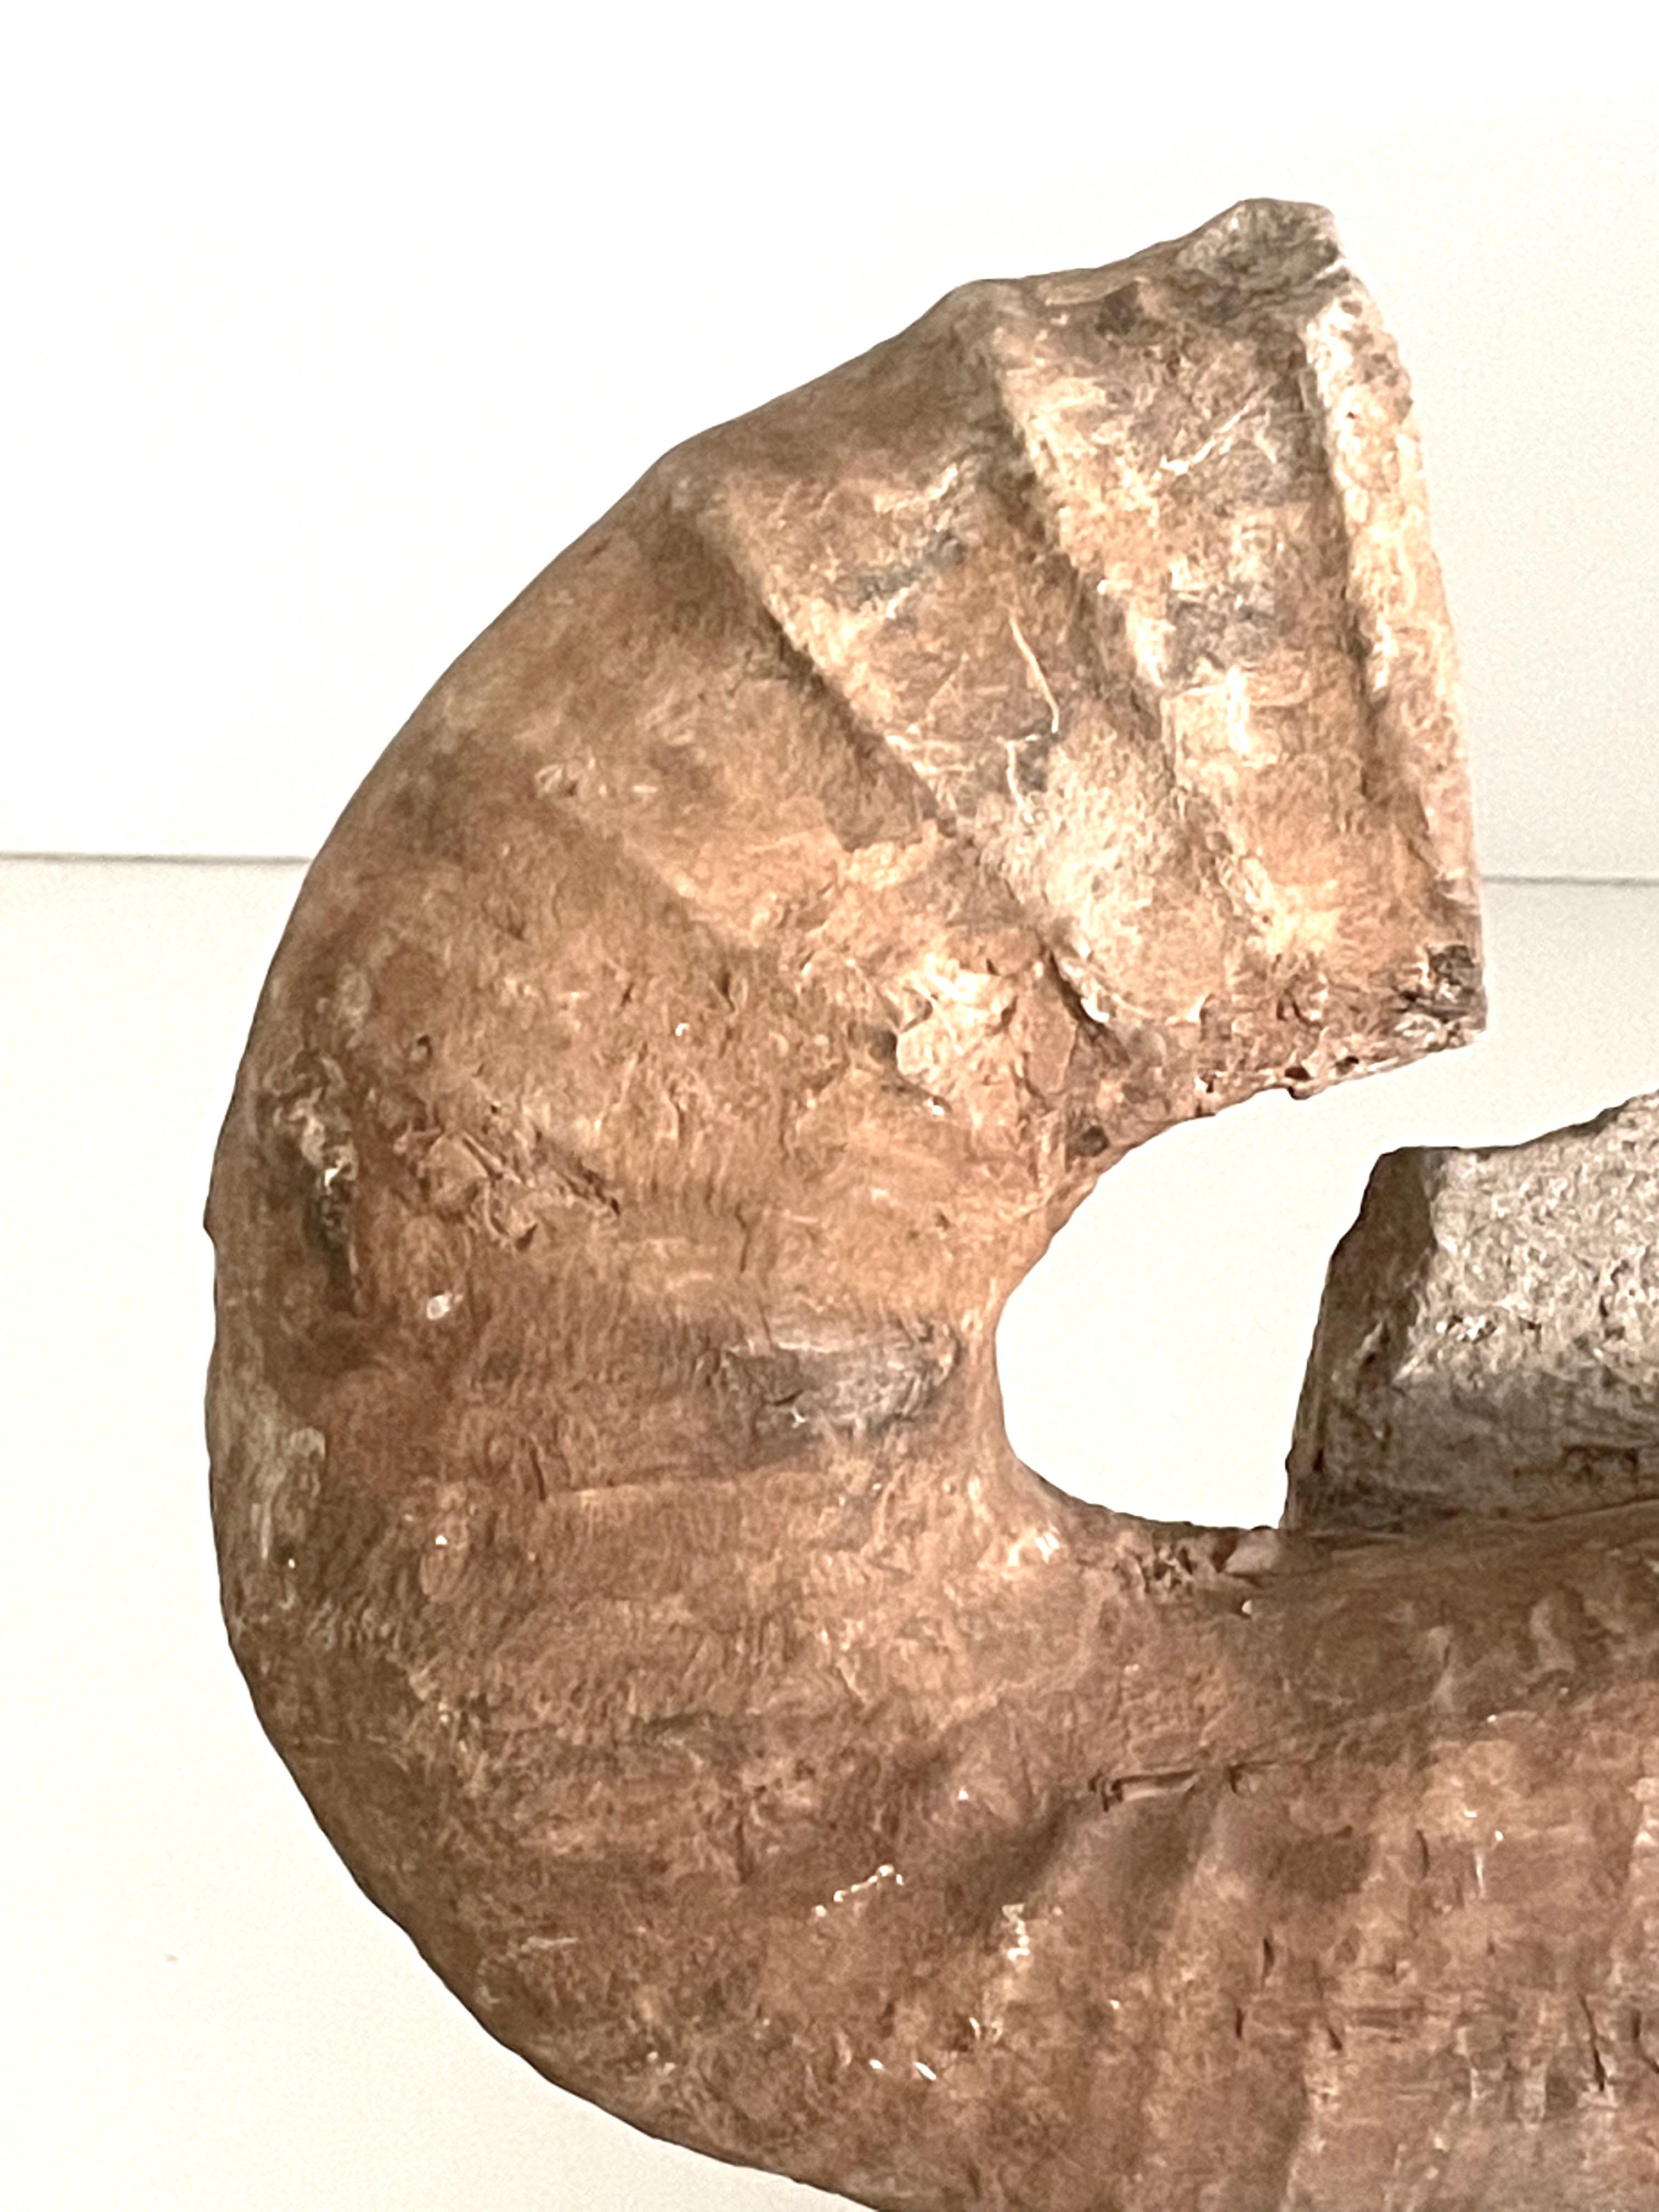 Prehistoric ammonite unusual horn shaped fossil from Madagascar.
Fossil is mounted on a stone stand.
Beautiful natural patina.